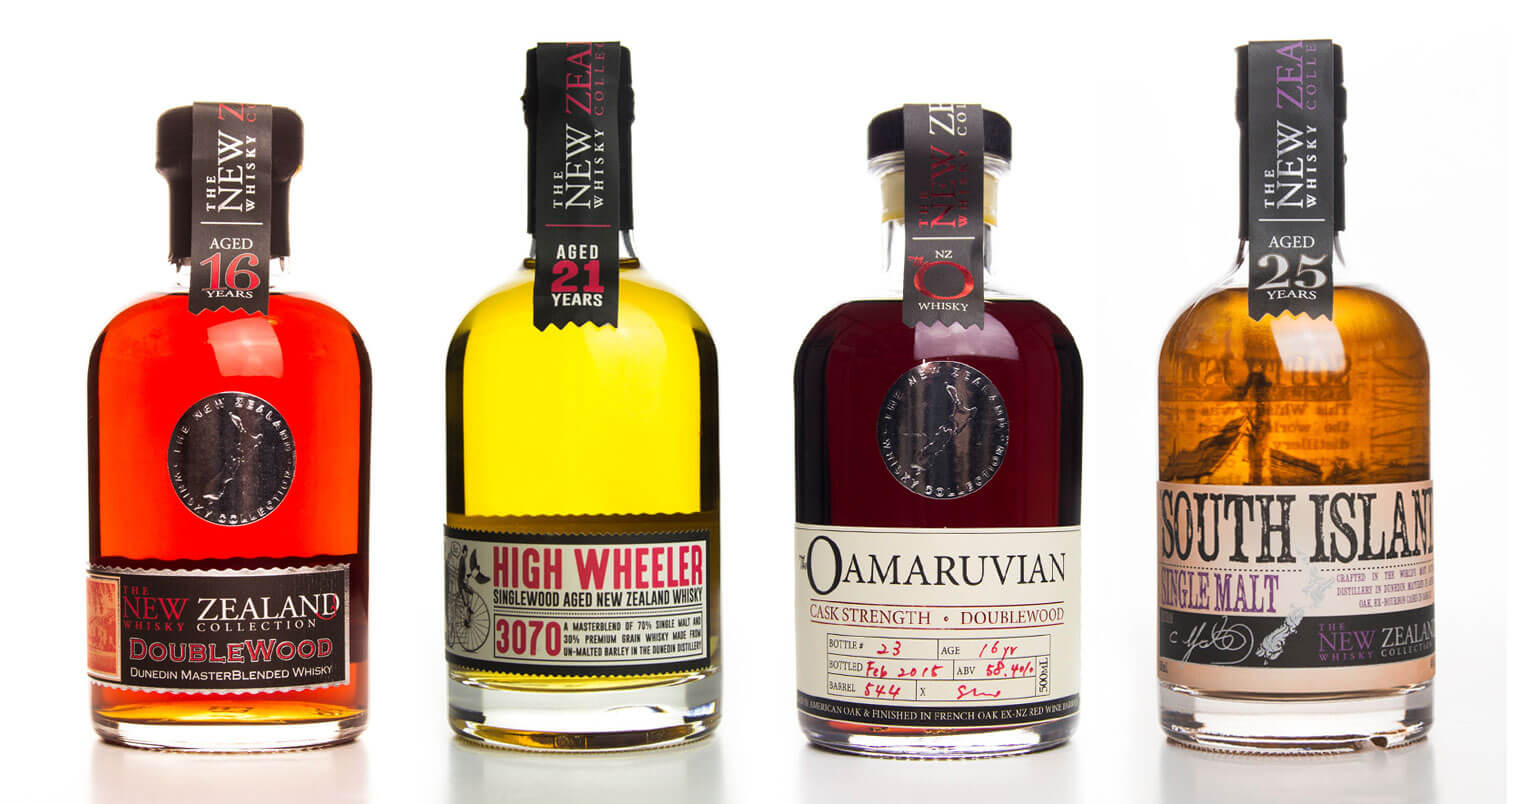 Anchor Distilling Adds New Zealand Whisky Collection to Portfolio, featured image